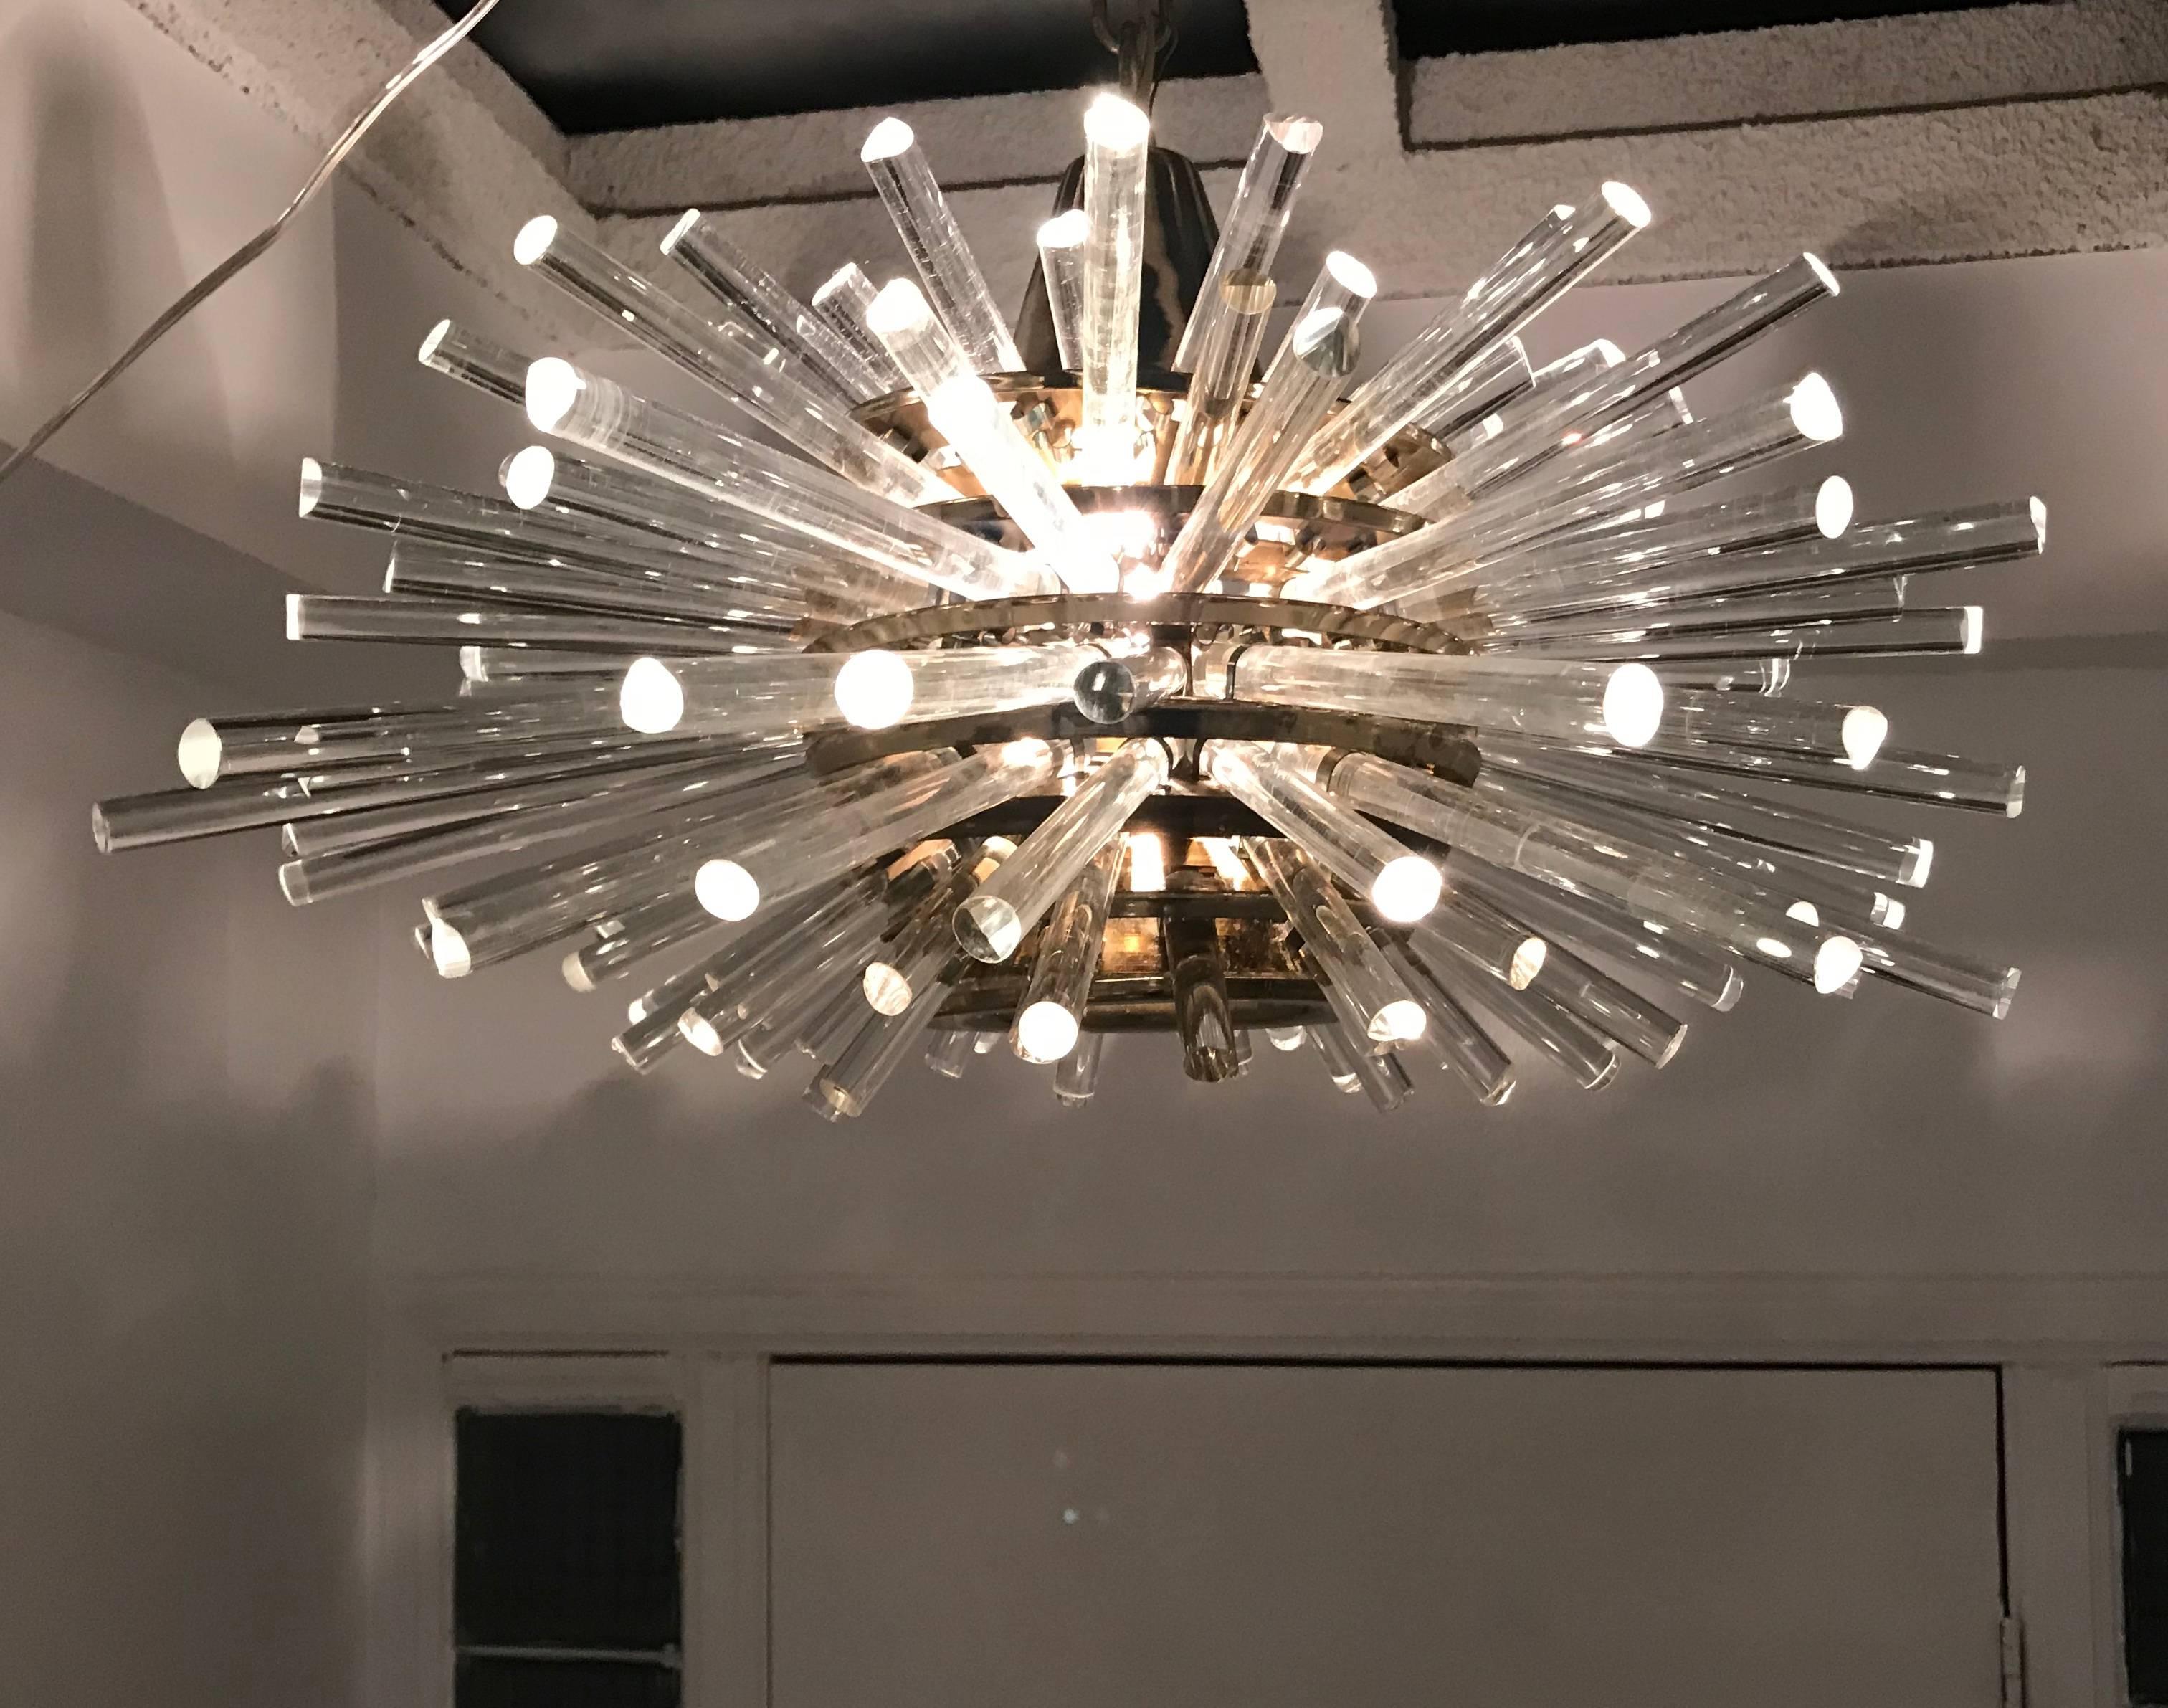 An original iconic 1960s design by the Austrian Crystal company, Bakalowits and Sohn. The Miracle chandelier is composed of a polished brass frame with seven tiers of different length crystals. Newly Rewired with a porcelain standard 360 watt